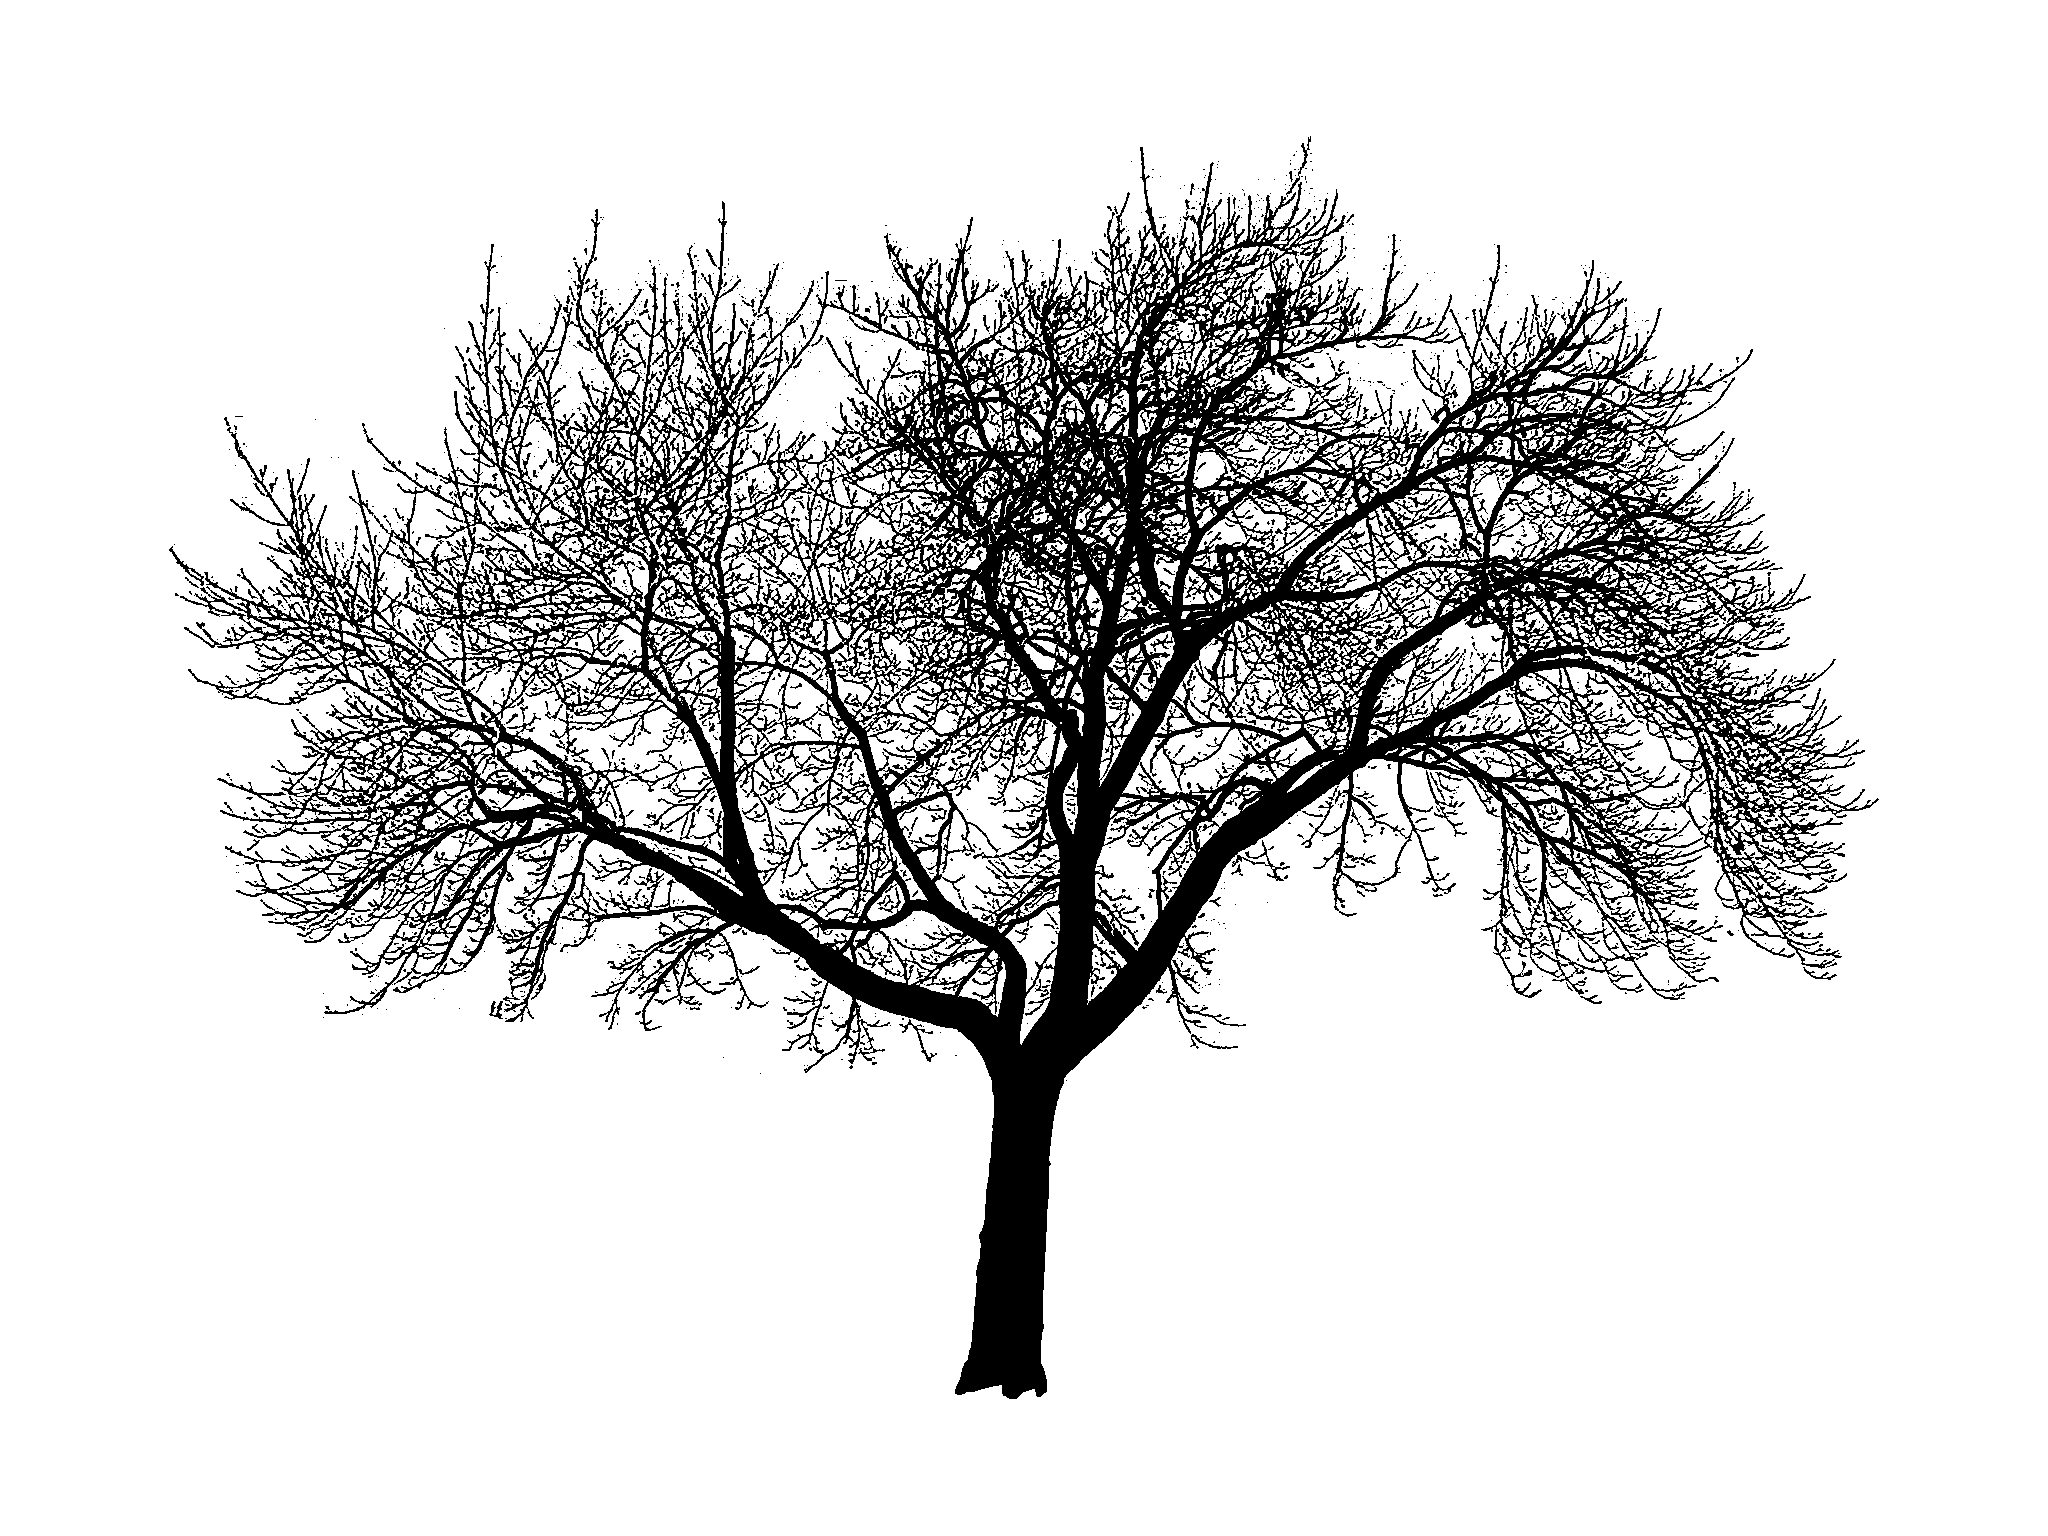 Tree Silhouette Background wallpaper | 2048x1536 | #32244